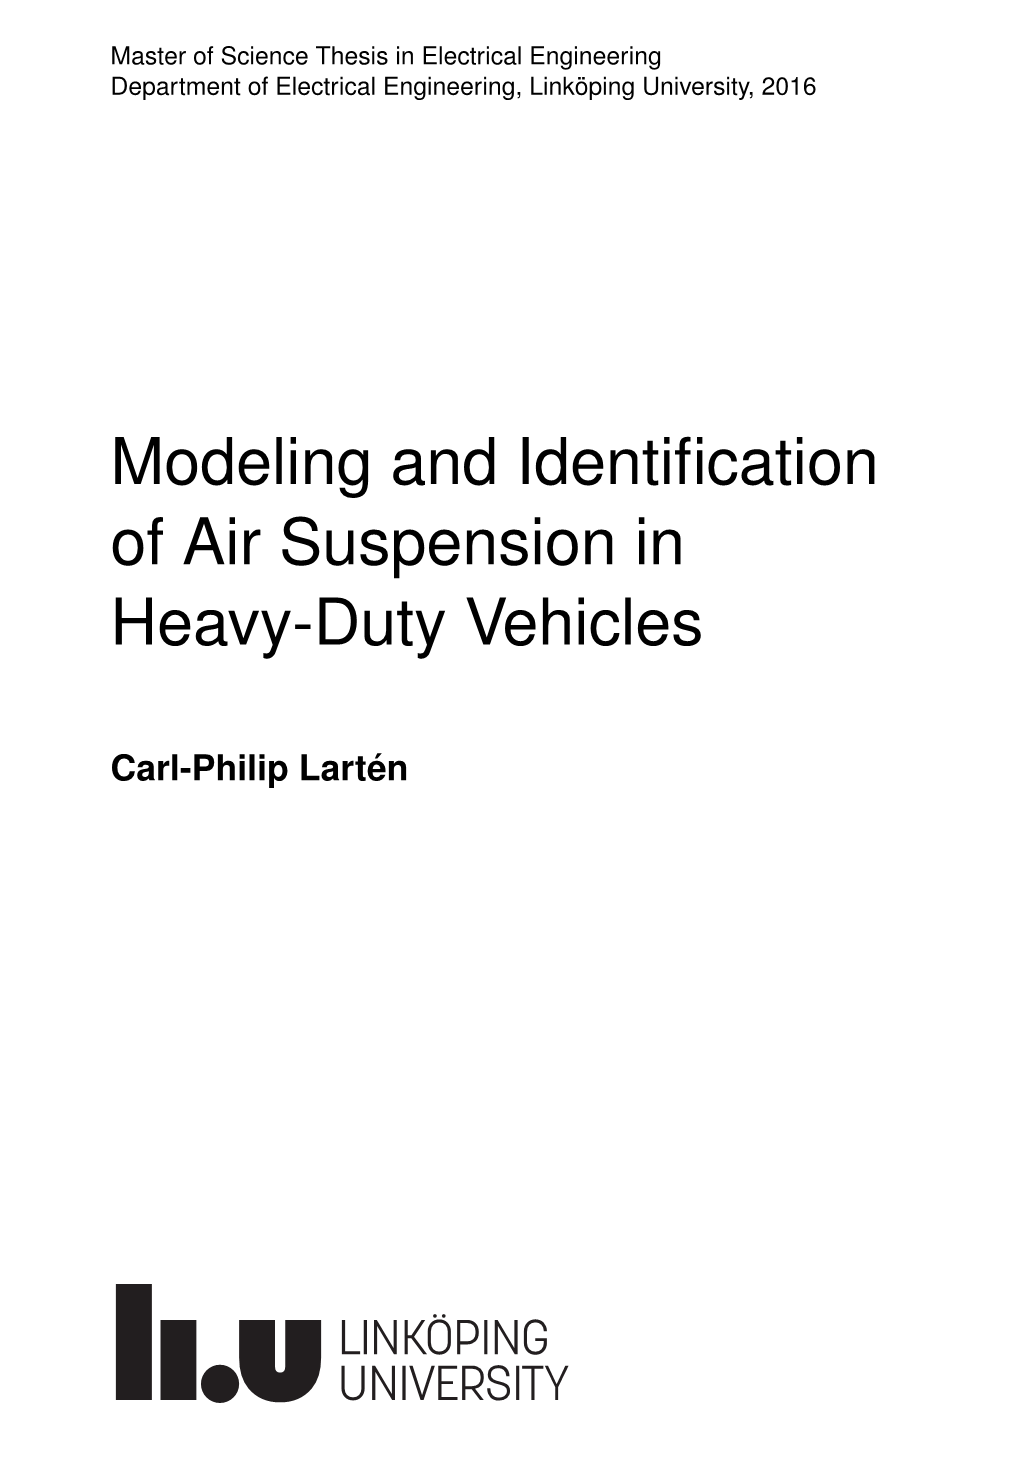 Modeling and Identification of Air Suspension in Heavy-Duty Vehicles